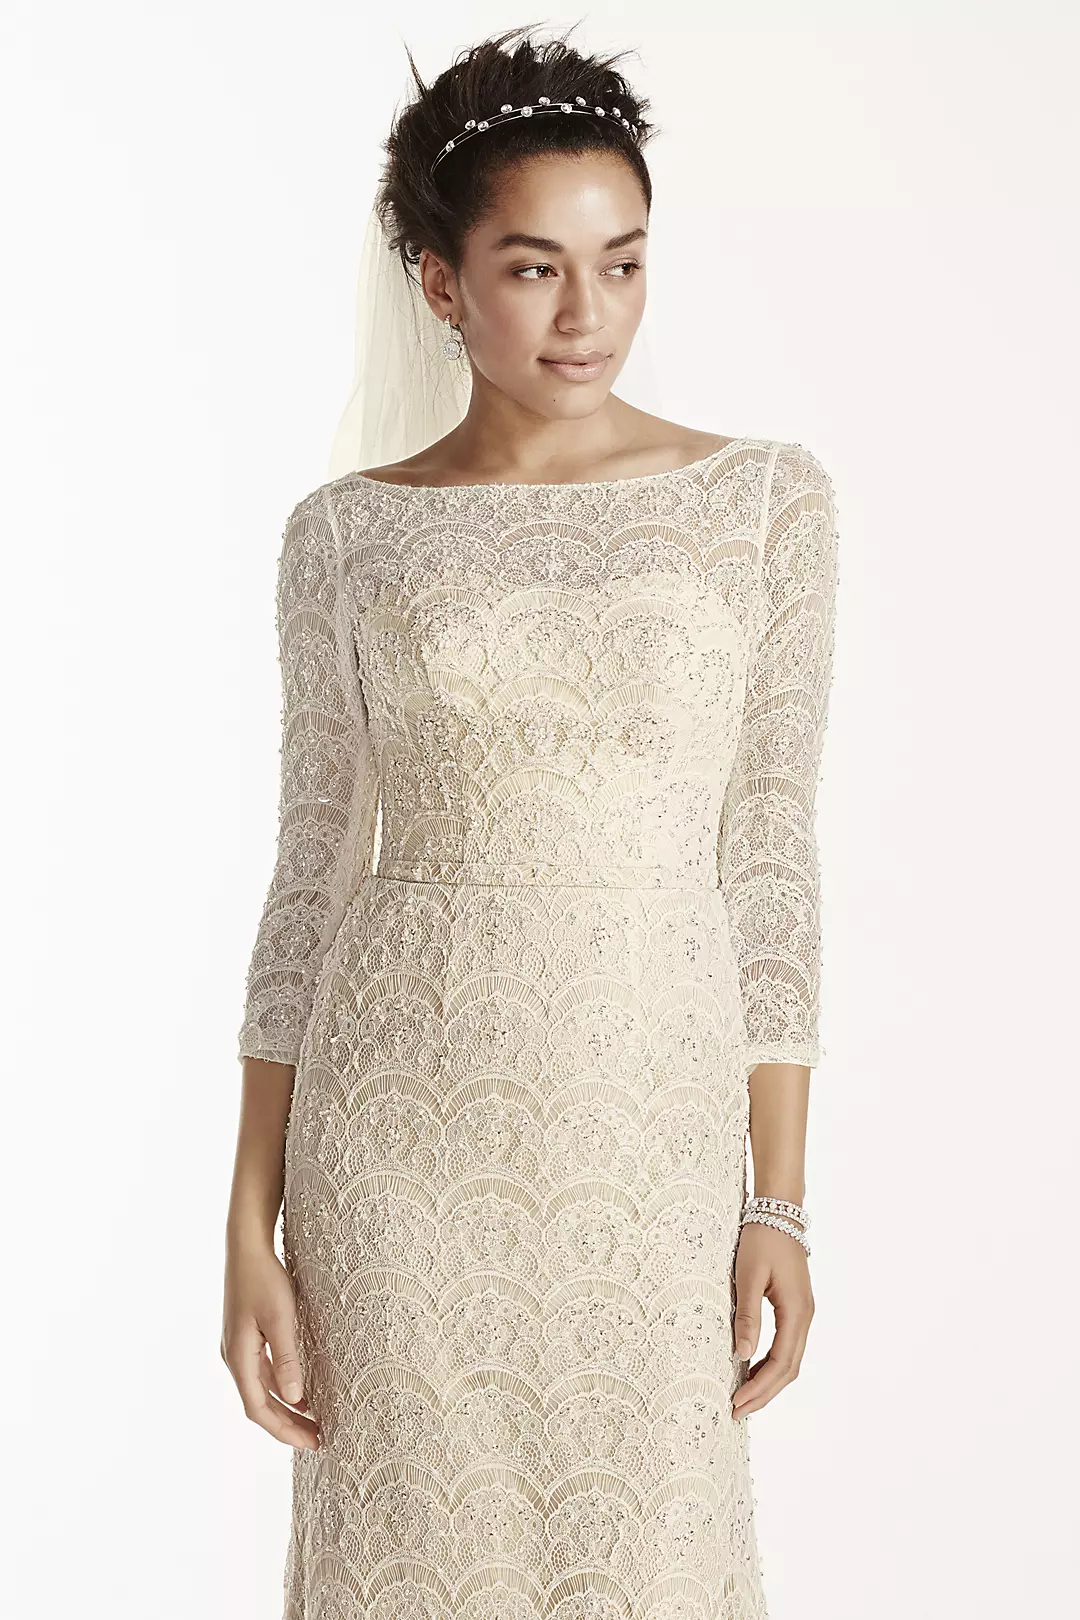 As - Is Beaded Lace 3/4 Sleeved Wedding Dress Image 3